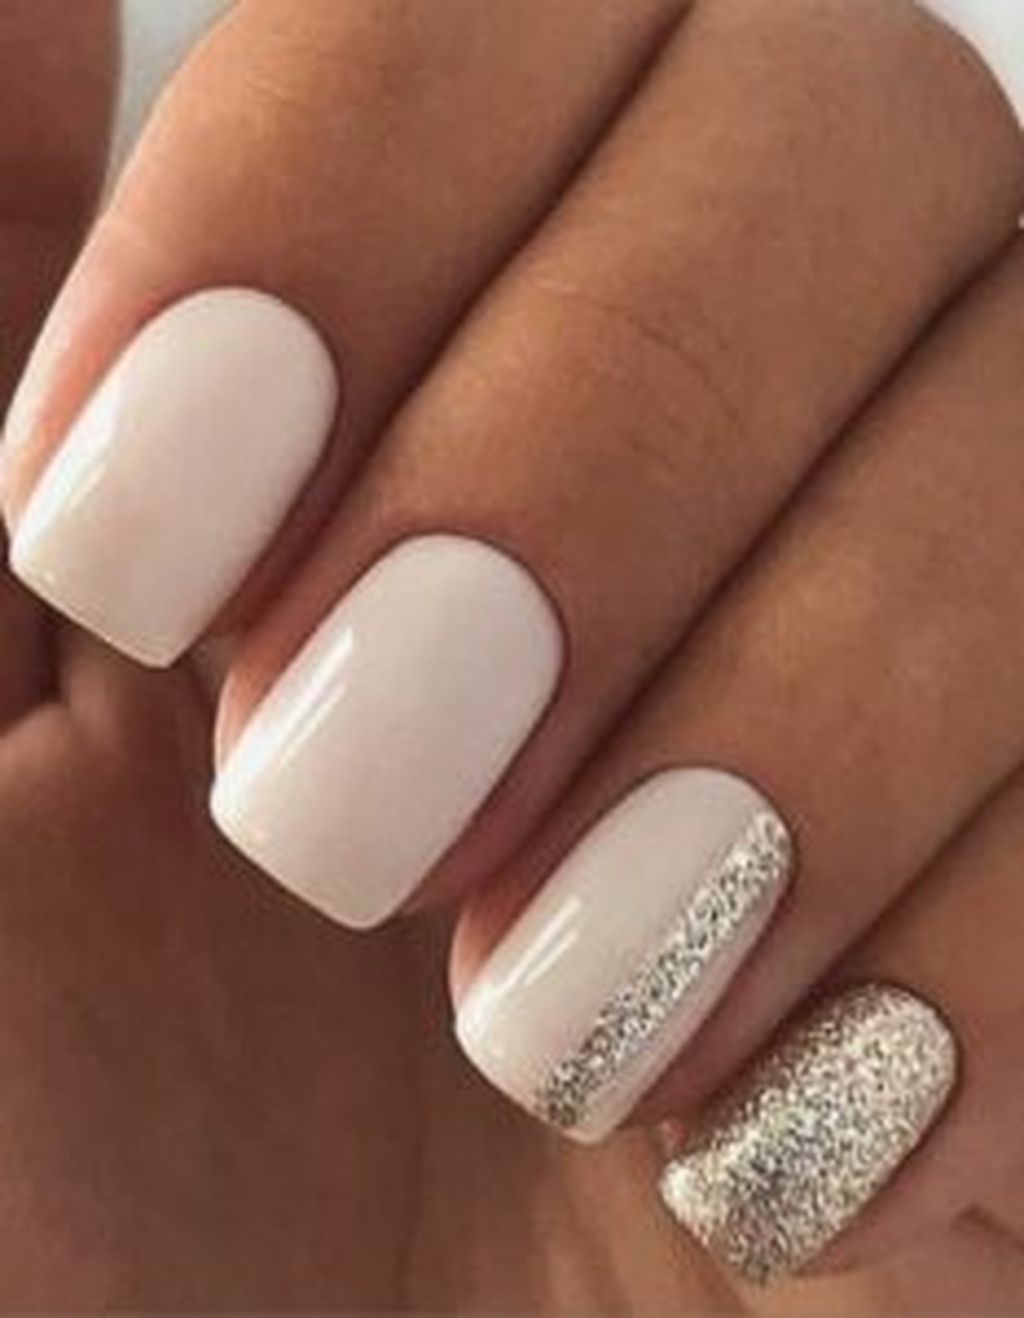 30 Gorgeous Fall Beach Nails Designs Ideas For Your Exceptional Look In 2020 Short Square Nails Beach Nail Designs Short Acrylic Nails